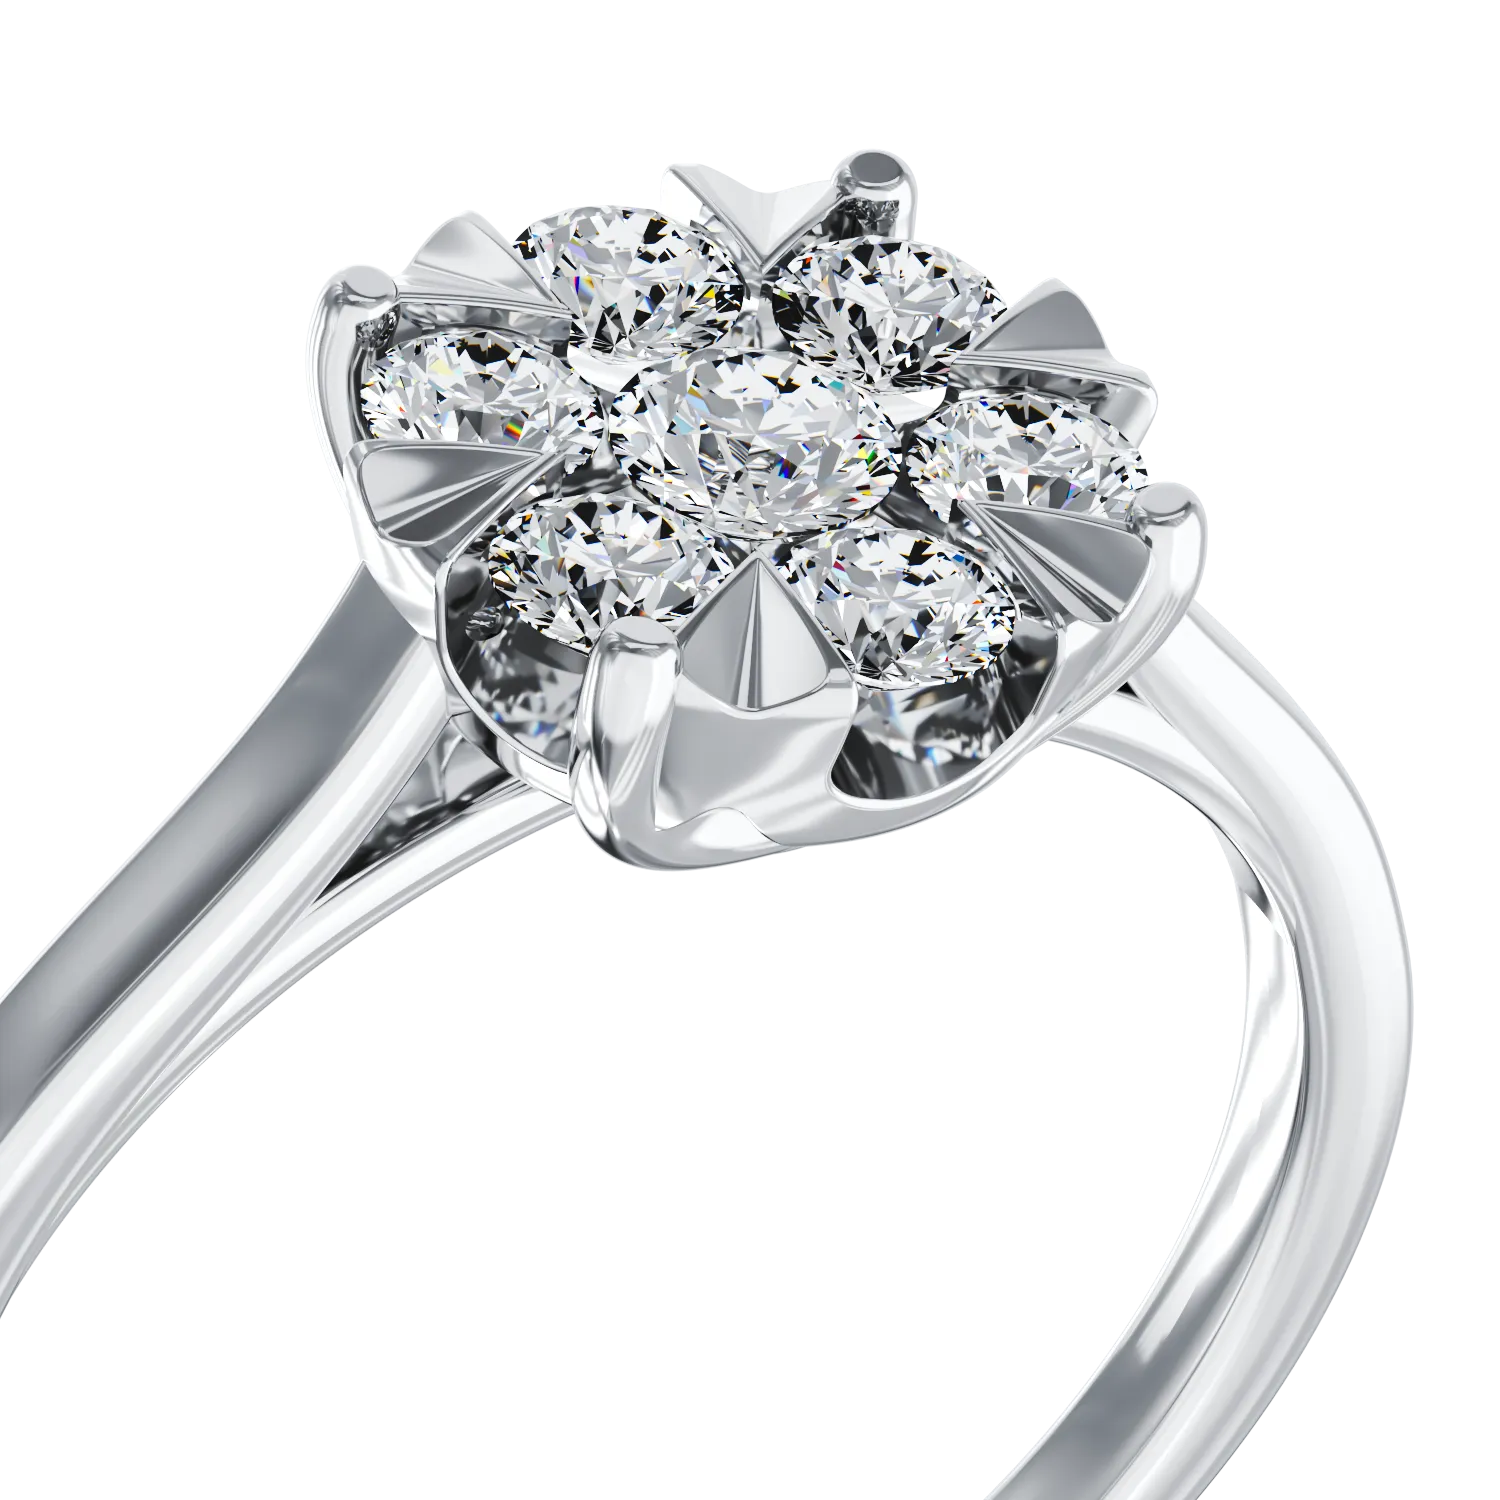 18K white gold engagement ring with 0.2ct diamonds